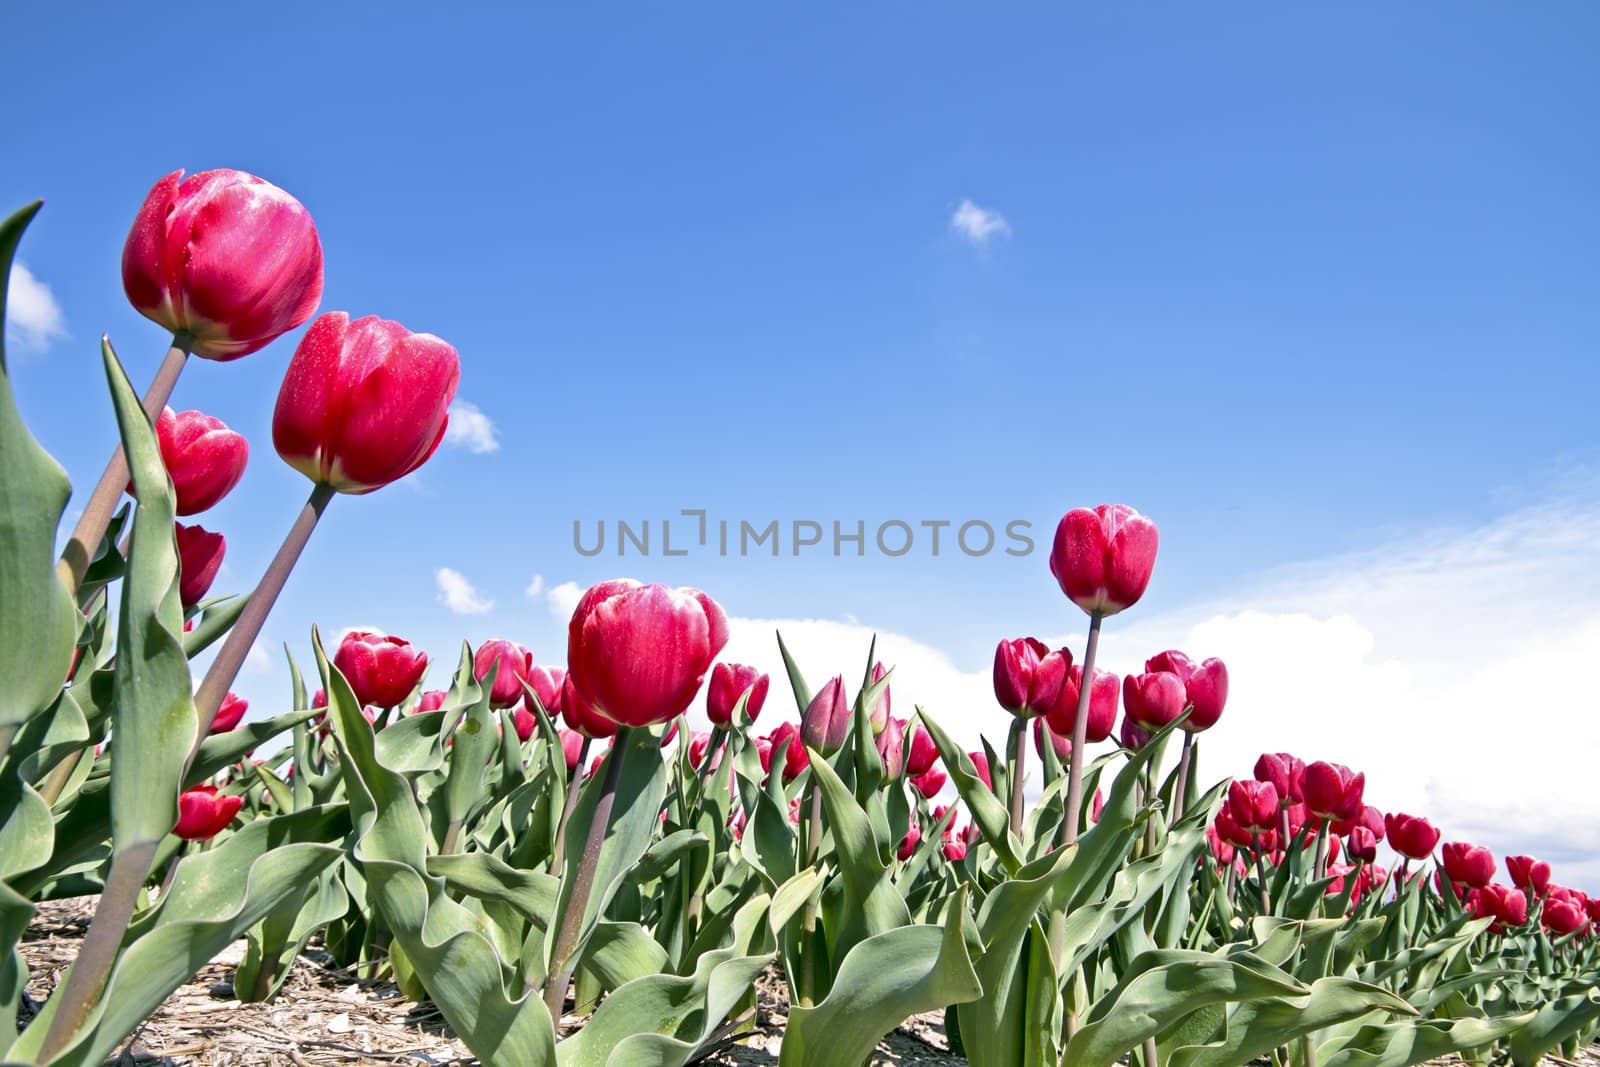 Tulips in the countryside from the Netherlands by devy